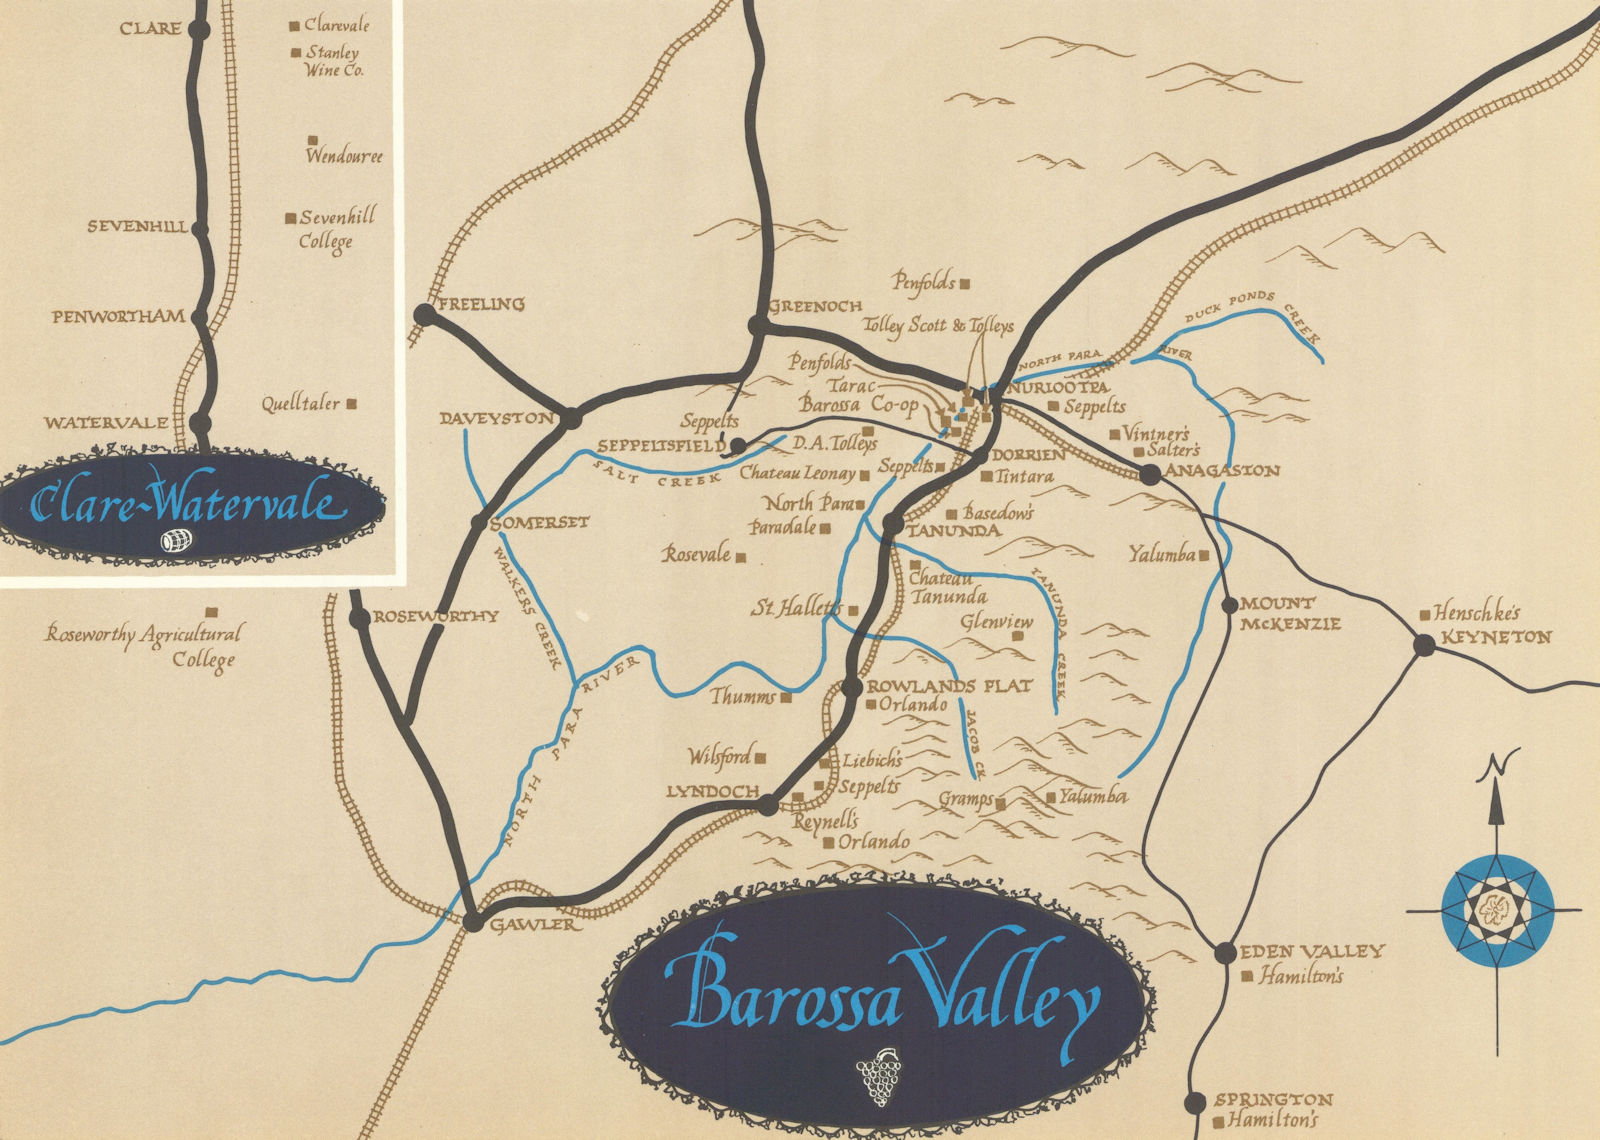 Clare, Watervale & Barossa Valley. South Australia wineries 1966 old map